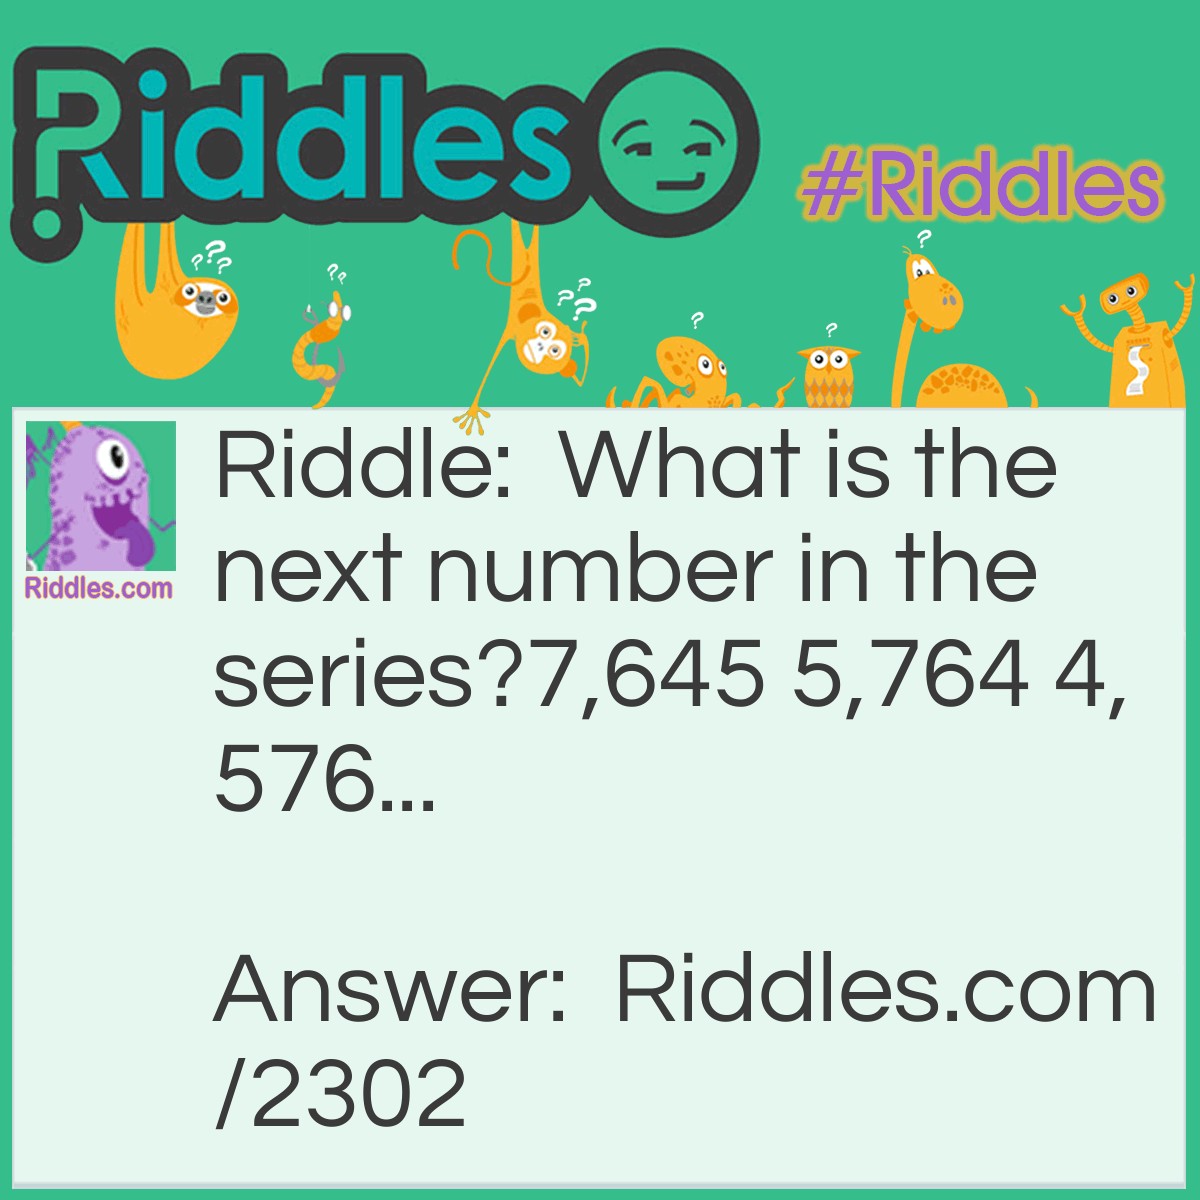 Riddle: What is the next number in the series?
7,645 5,764 4,576... Answer: 6,457. The last digit is moved to the front to make the next number.